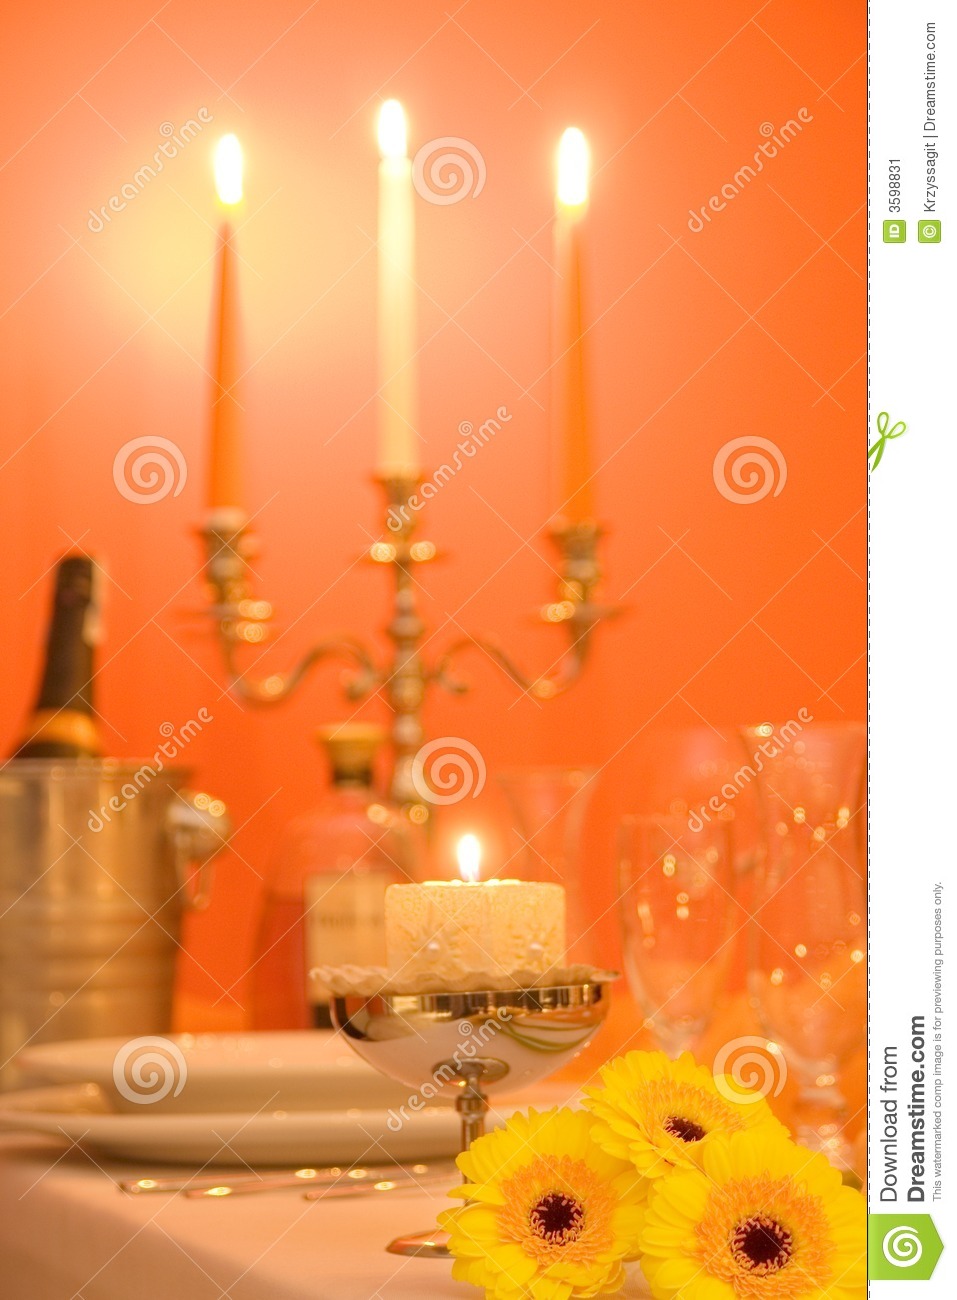 Candlelight Dinner Stock Image   Image  3598831